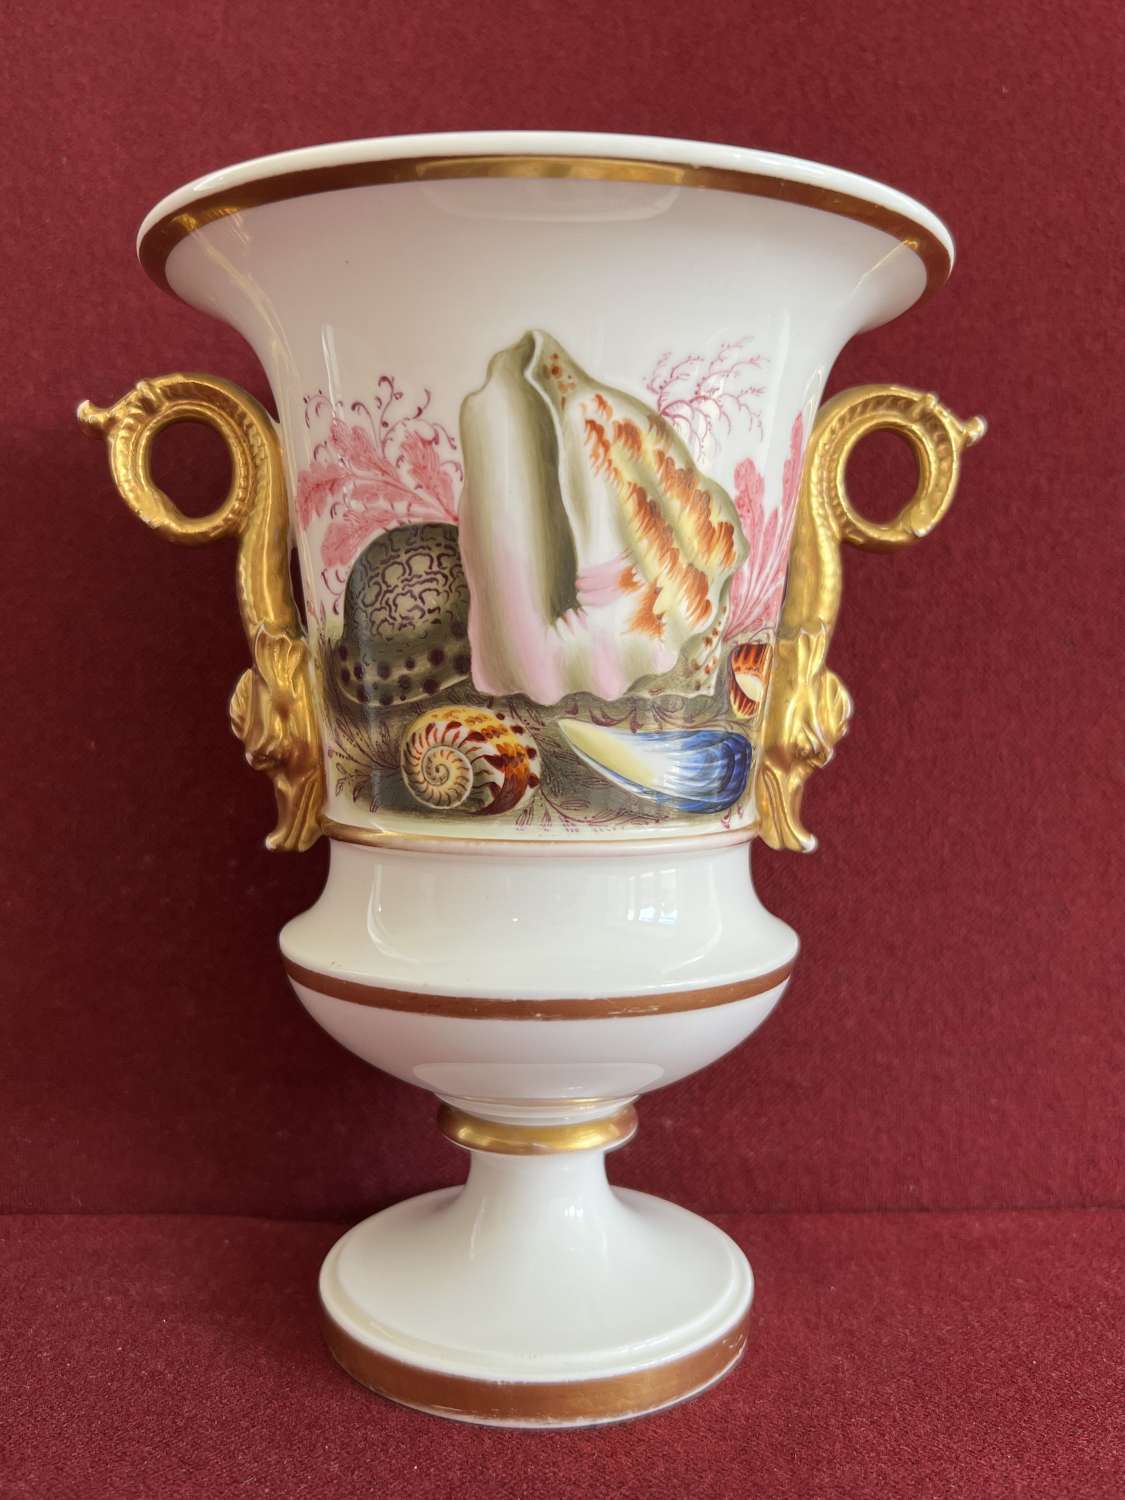 A rare Spode porcelain shell decorated vase pattern 3930 c.1824